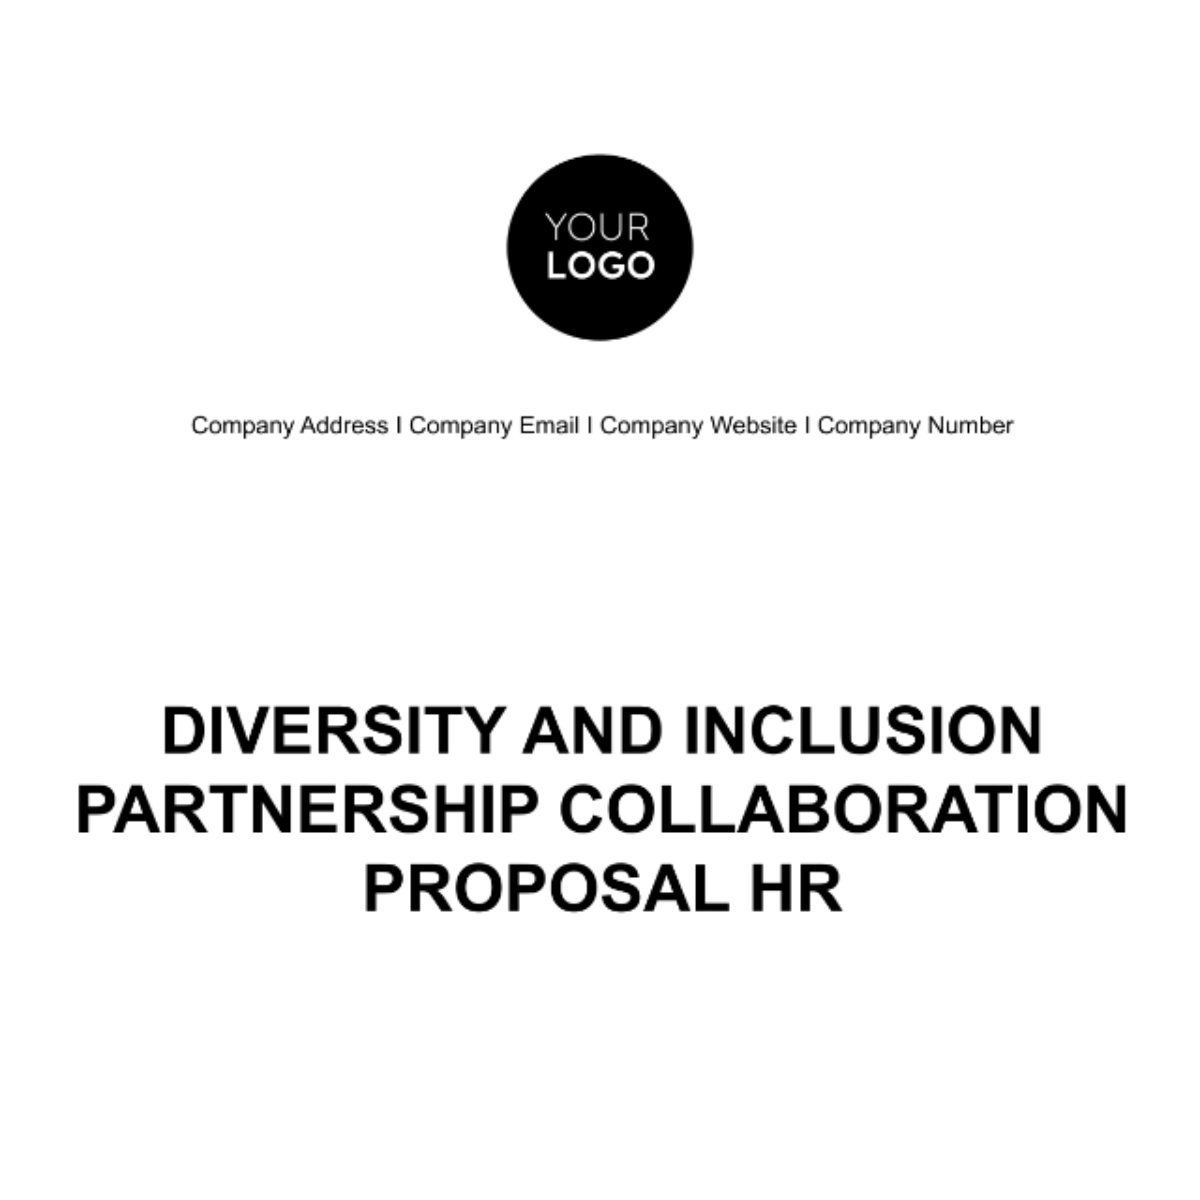 Diversity and Inclusion Partnership Collaboration Proposal HR Template